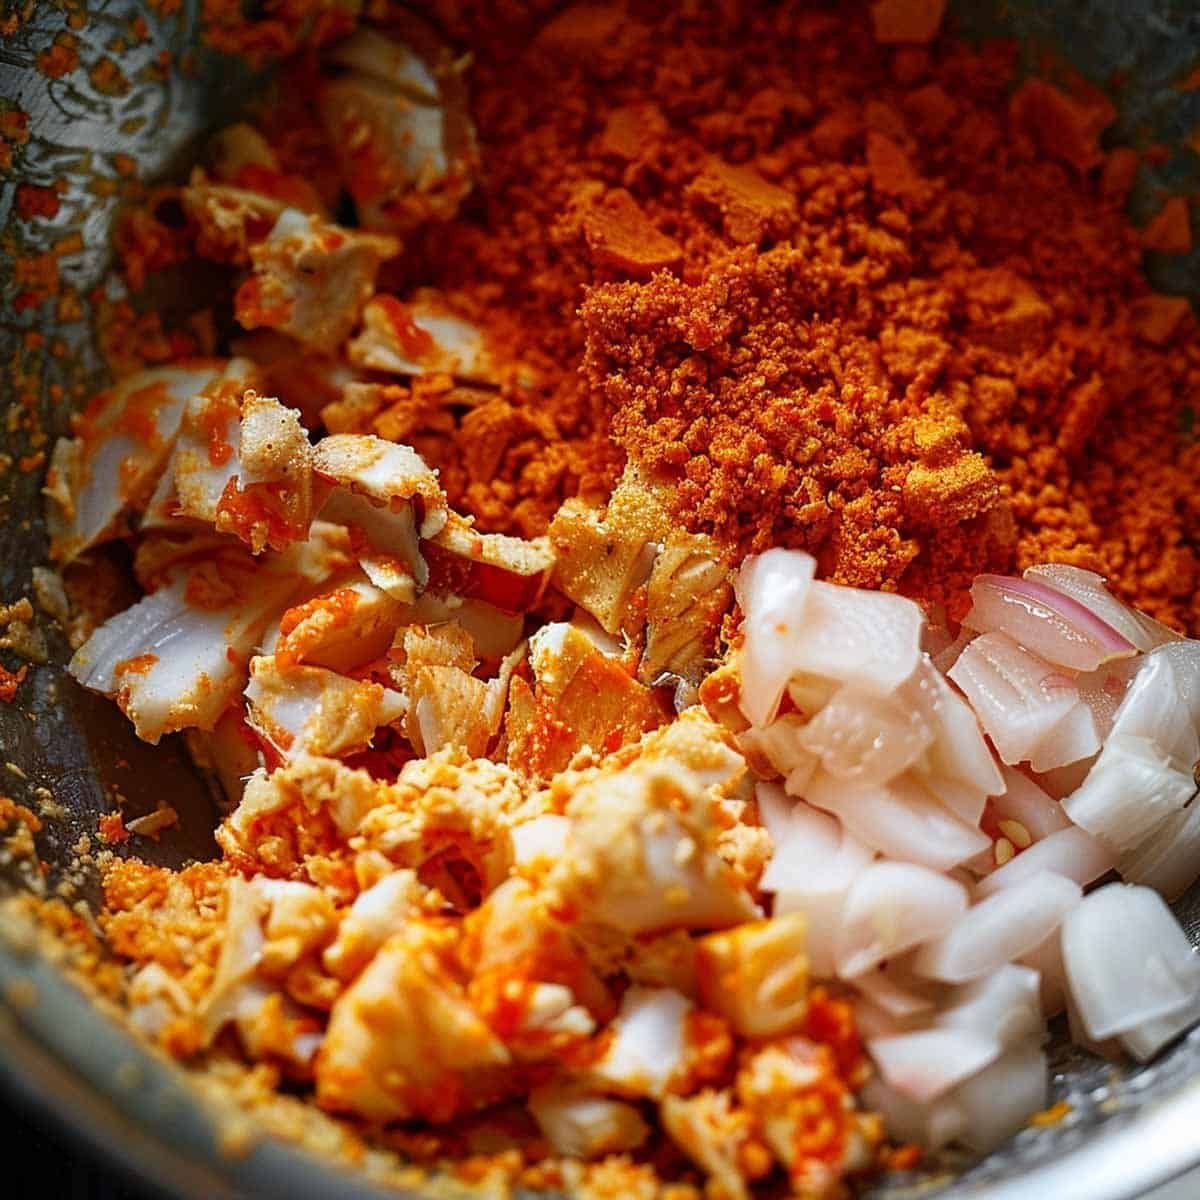 Finely chopped white fish fillets in a large mixing bowl with red curry paste, egg, fish sauce, and sugar